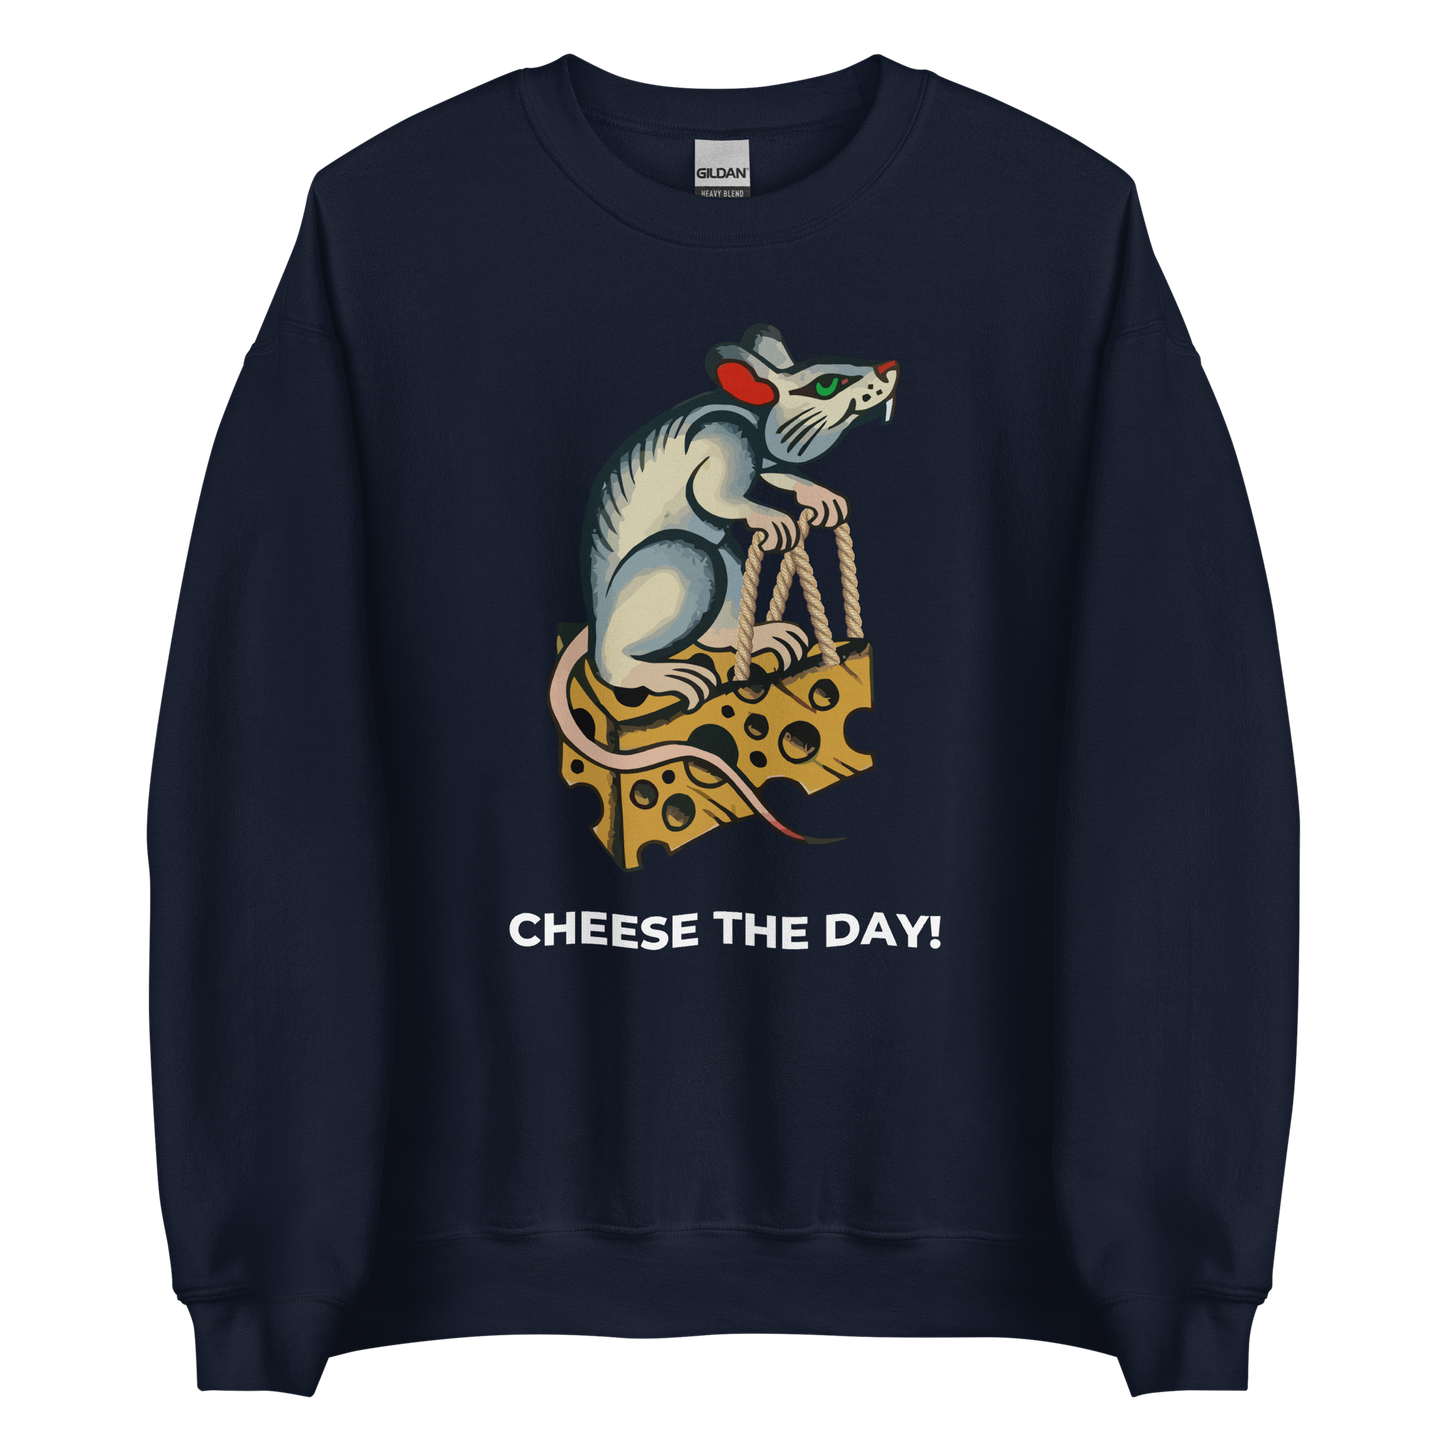 Navy  Rat Sweatshirt featuring a hilarious Cheese The Day graphic on the chest - Funny Graphic Rat Sweatshirts - Boozy Fox